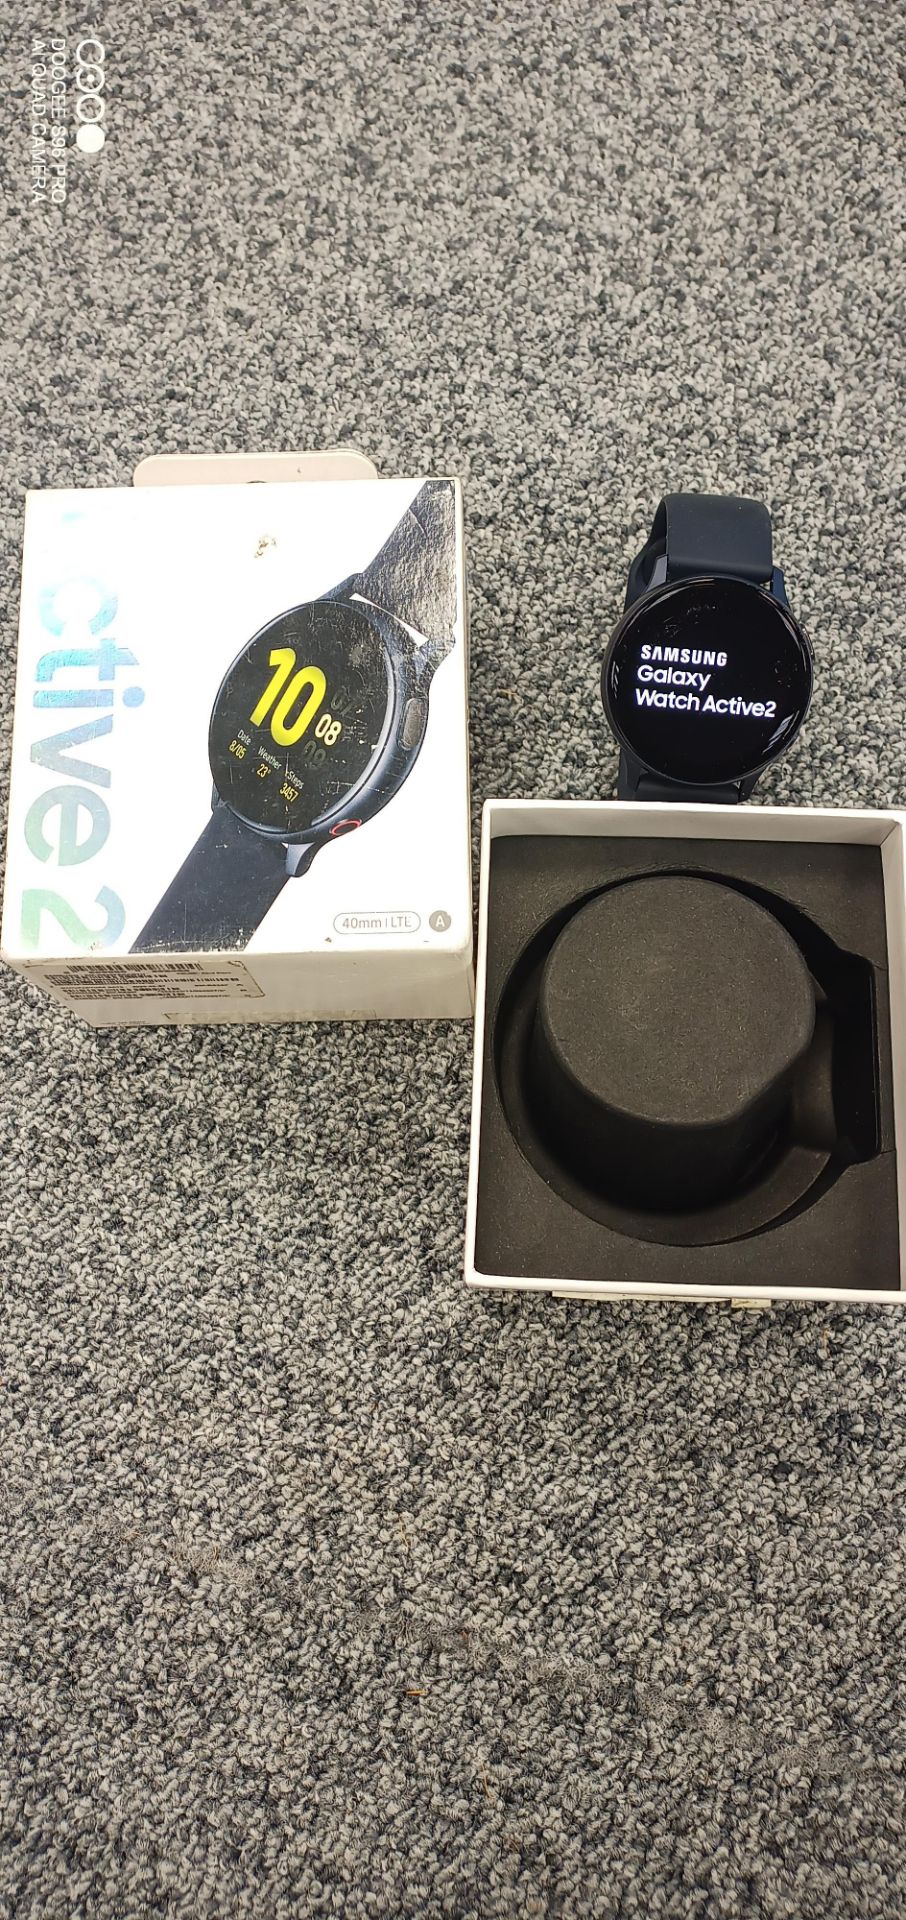 Samsung Active 2 watch - Black - untested unchecked with charger , boxed as pictured